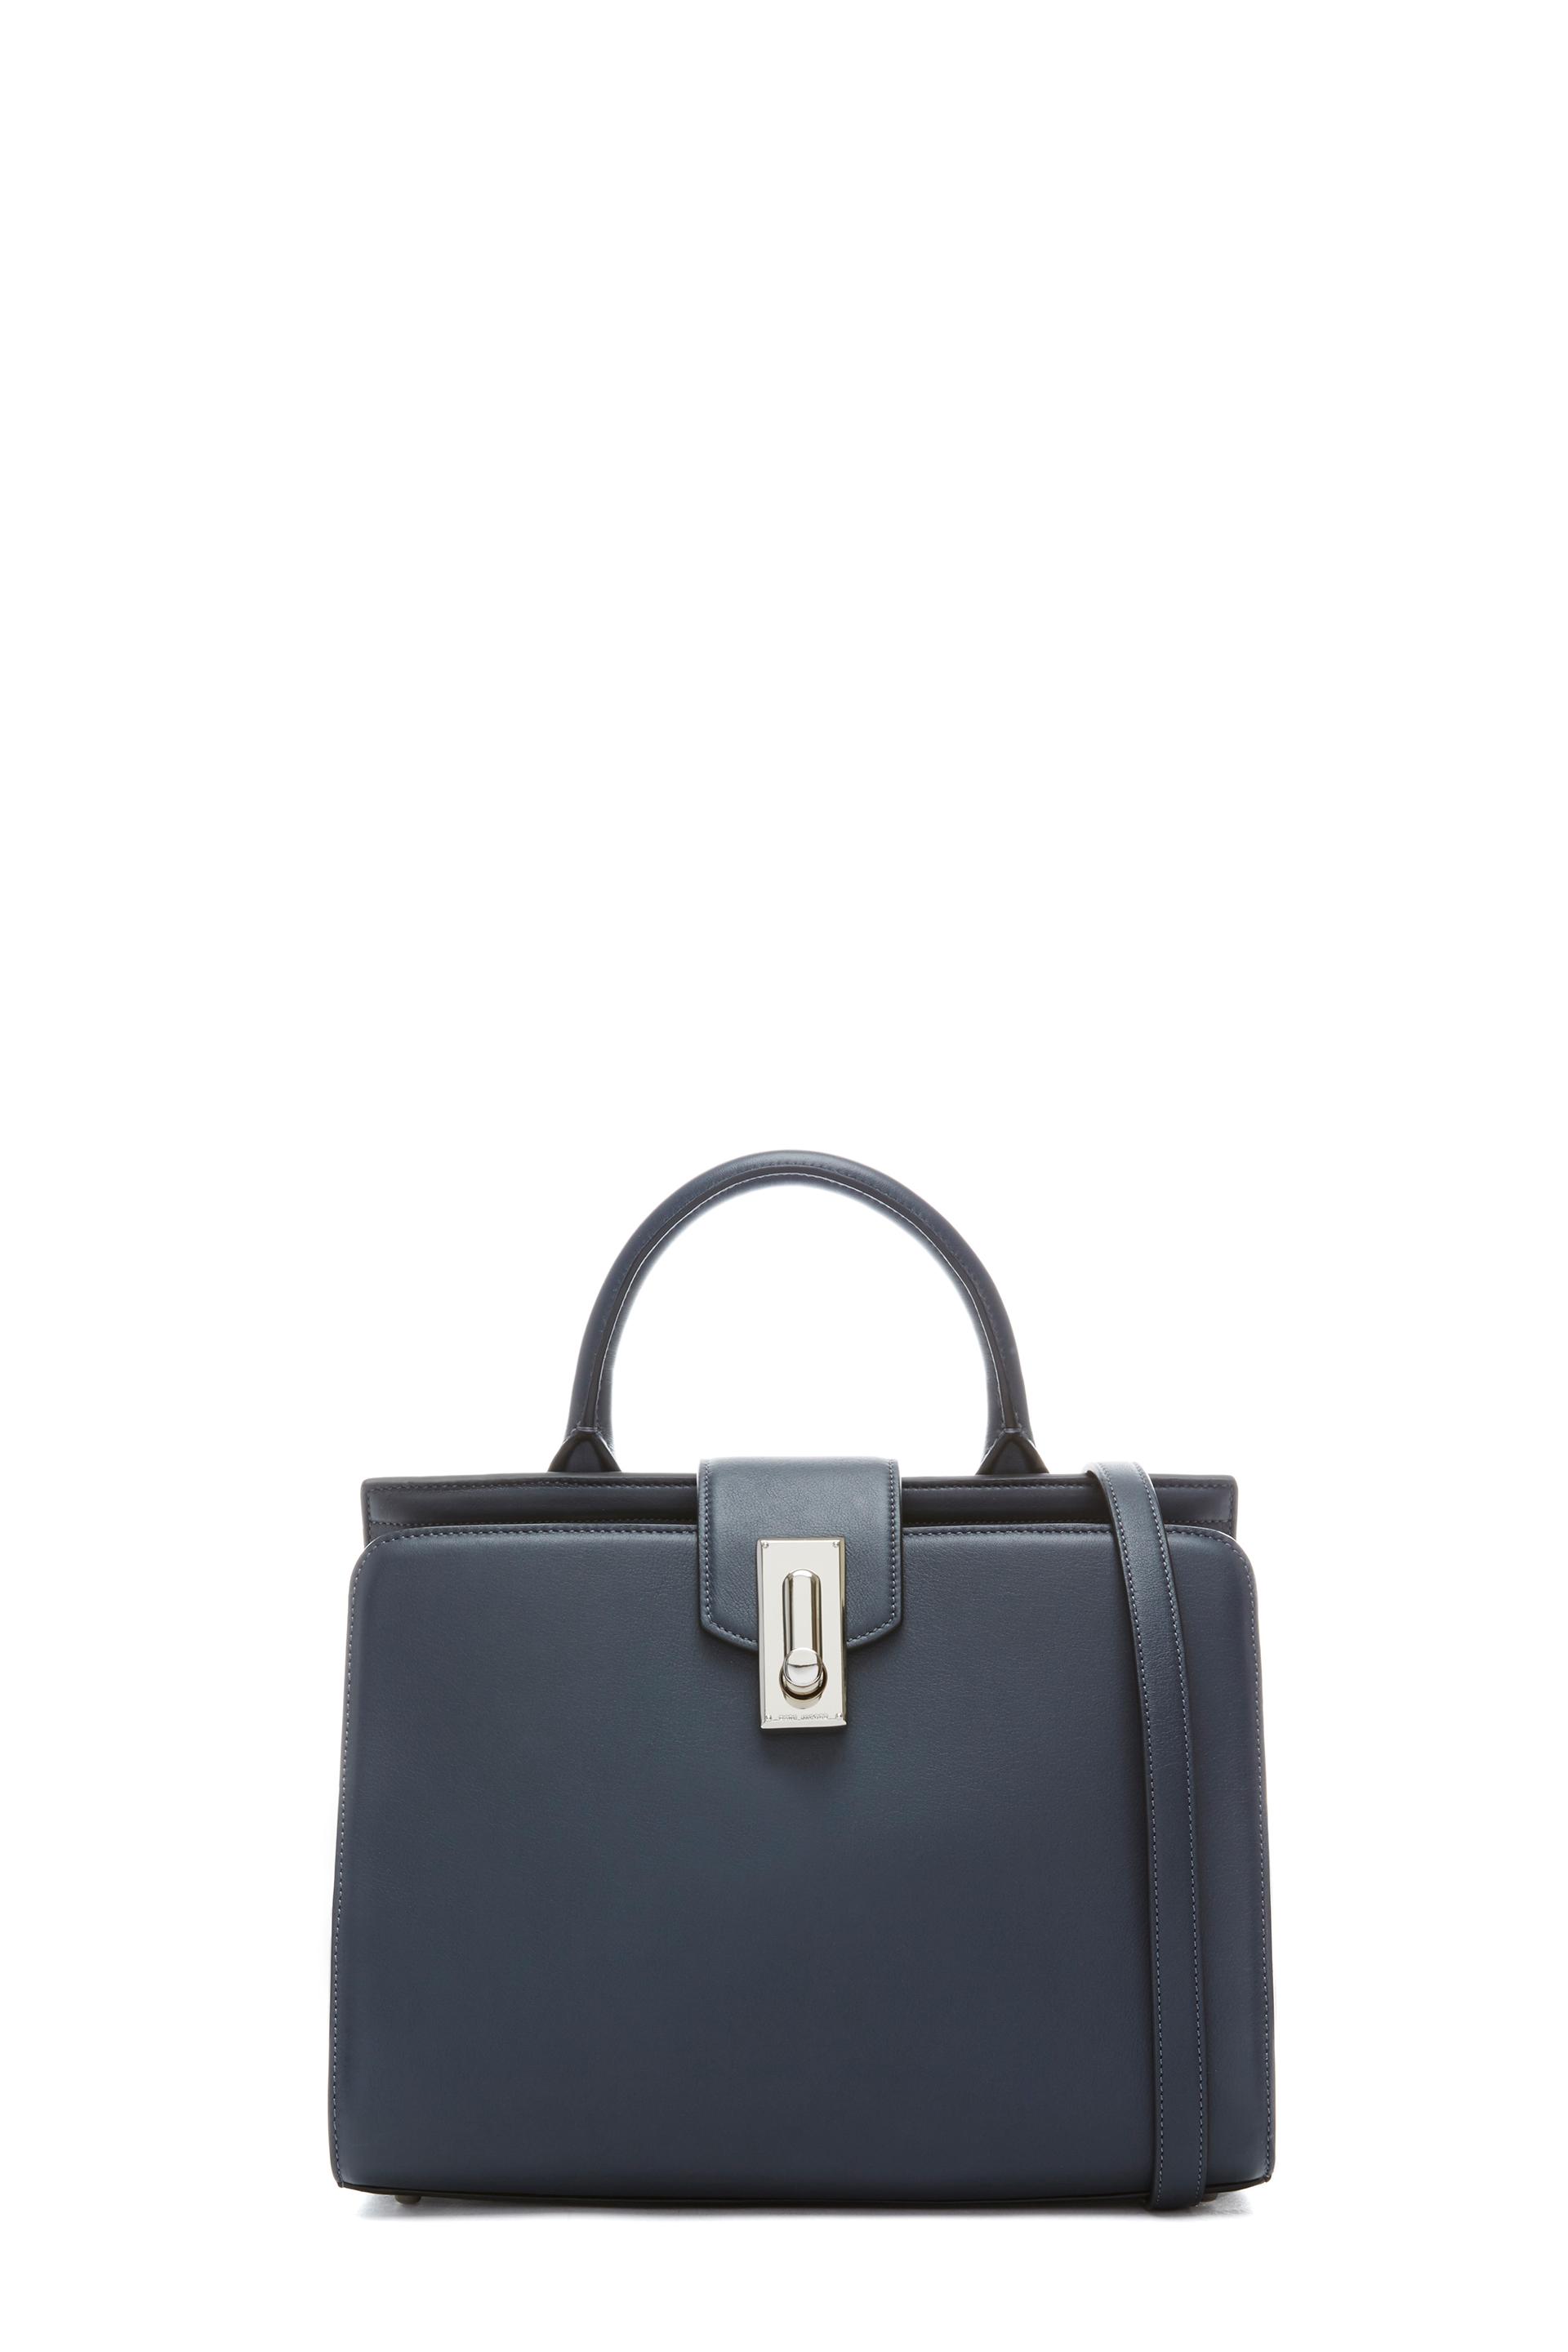 Marc Jacobs West End Leather Small Top Handle Tote Bag In Storm Grey ...